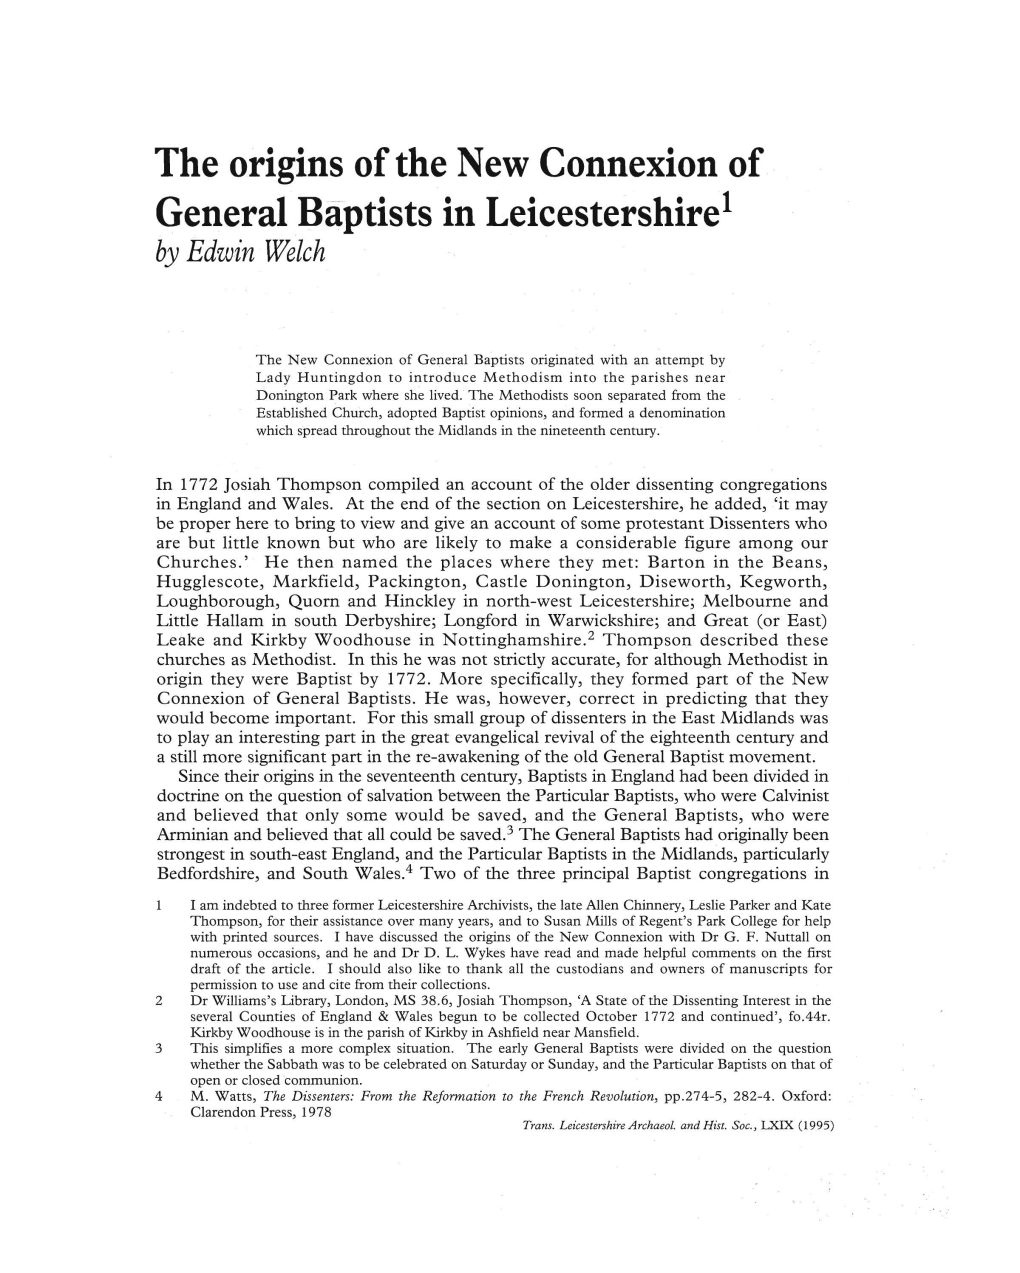 The Origins of the New Connexion of General Baptists in Leicestershire1 by Edwin Welch